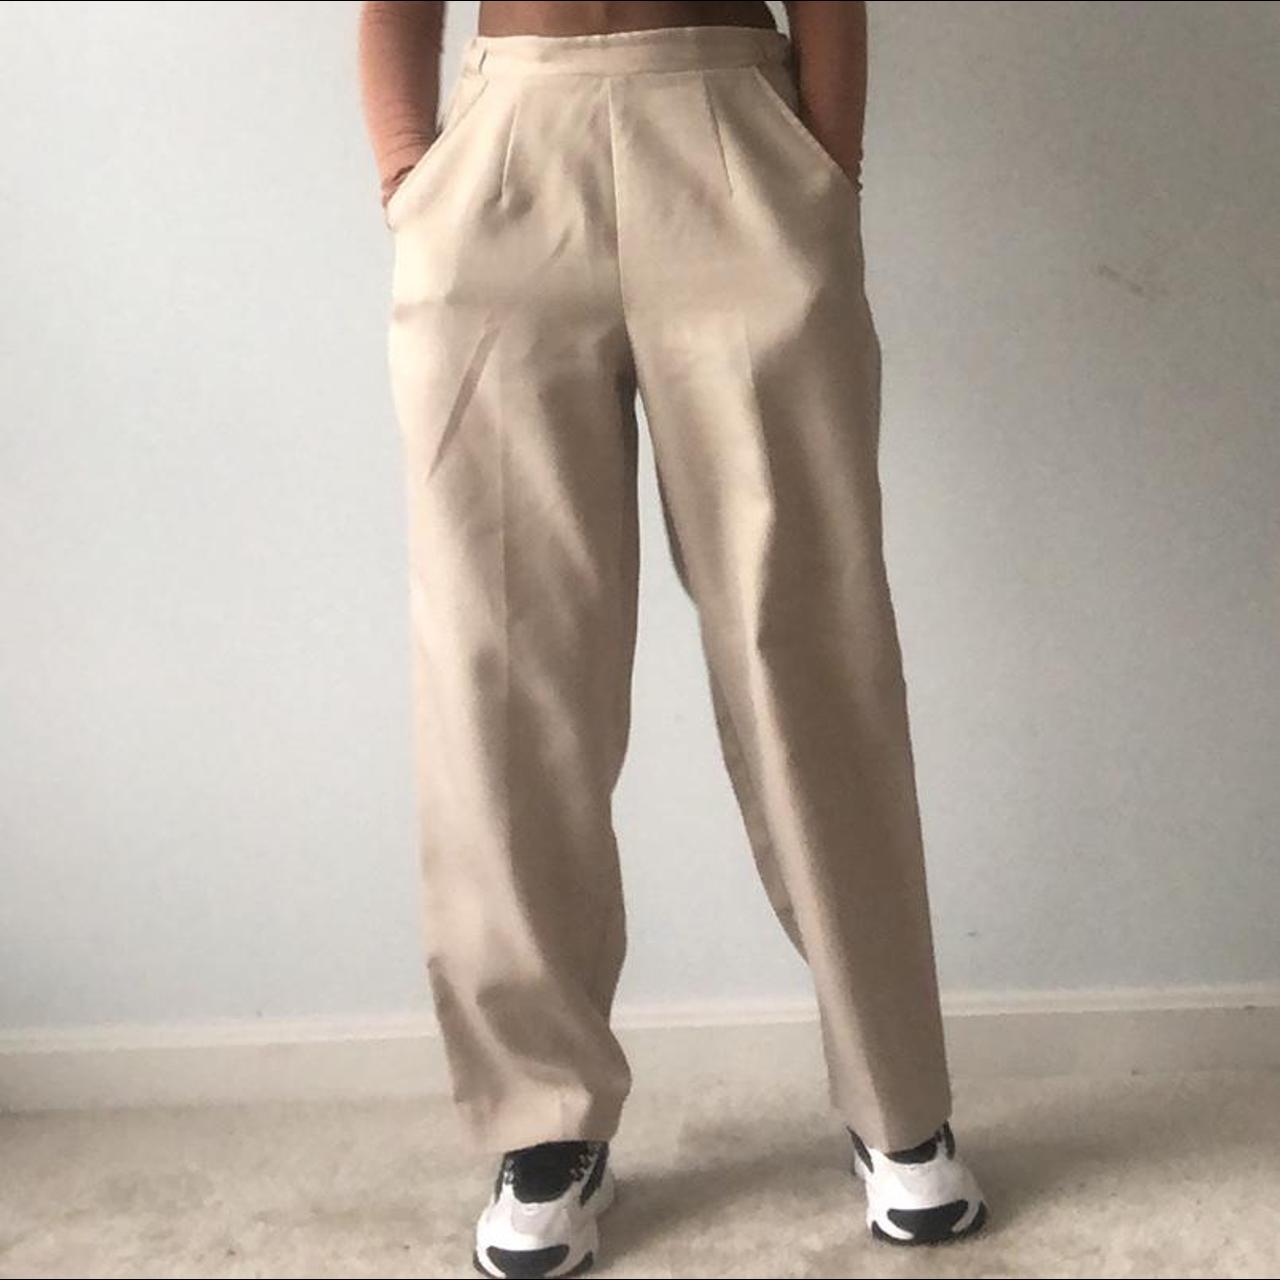 Women's Tan and Cream Trousers